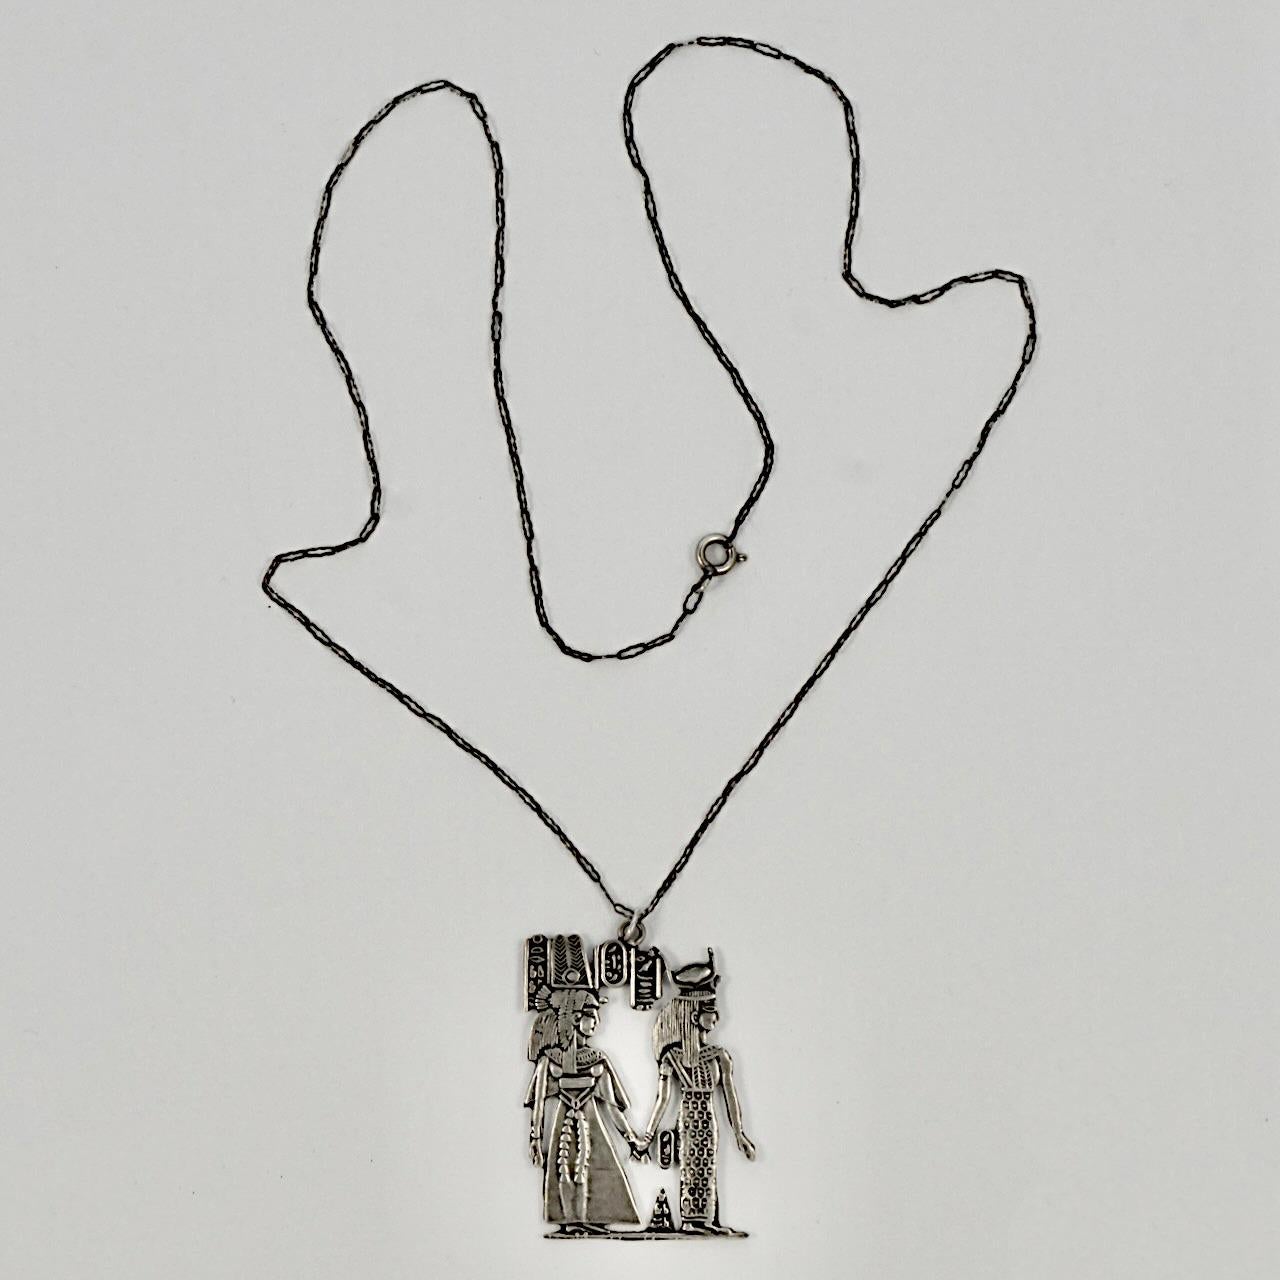 Beautiful Egyptian Revival silver pendant with Egyptian hallmarks, hung on a silver paperclip design chain. The pendant measures length 4.3 cm / 1.69 inches by width 3.1 cm / 1.2 inches. The chain is length 54.5 cm / 21.45 inches. Both the pendant